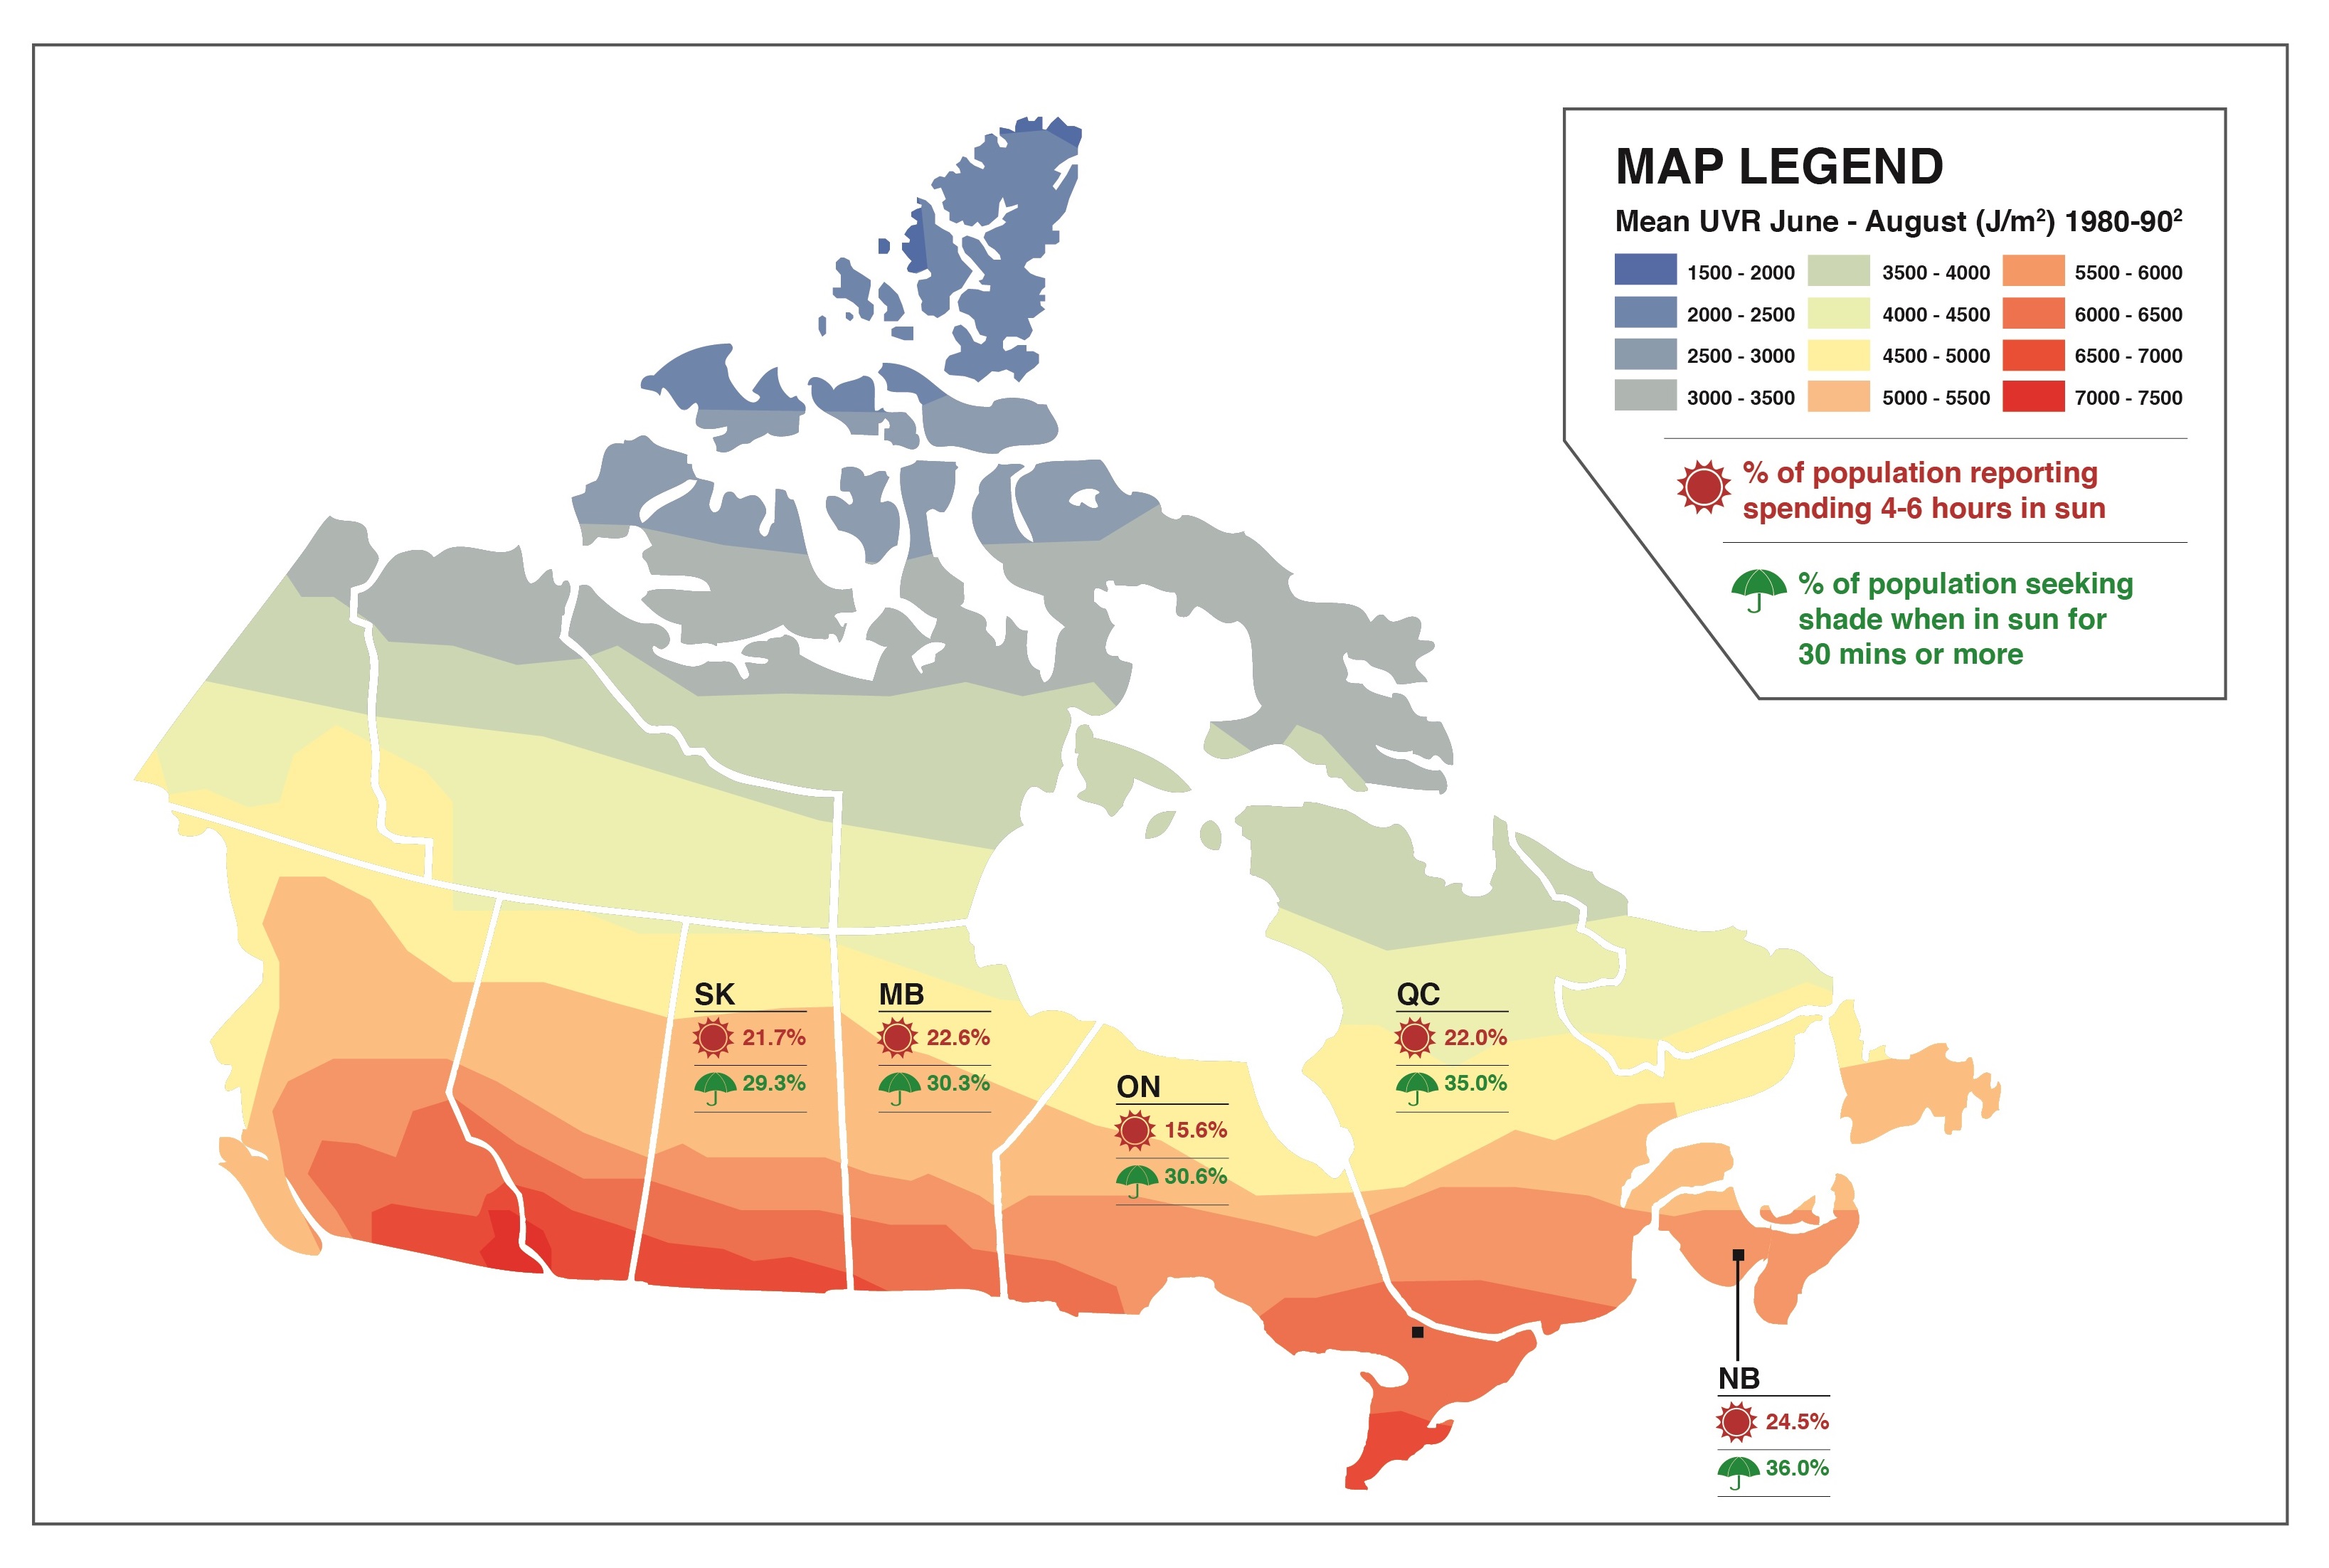 Map of Canada shows the percentage of the population reporting spending 4-6 hours in sun, and the percentage of the population seeking shade when in the sun for 30 minutes or more, in New Brunswick, Quebec, Ontario, Manitoba and Saskatchewan only. Saskatchewan: 21.7% spend 4-6 hours in sun; 29.3% seek shade after 30 minutes or more of sun Manitoba: 22.6% spend 4-6 hours in sun; 30.3% seek shade after 30 minutes or more of sun Ontario: 15.6% spend 4-6 hours in sun; 30.6% seek shade after 30 minutes or more of sun Quebec: 22.0% spend 4-6 hours in sun; 35.0% seek shade after 30 minutes or more of sun New Brunswick: 24.5% spend 4-6 hours in sun; 36.0% seek shade after 30 minutes or more of sun UVR exposure is highest in the summer months in the southern-most areas of the country. 